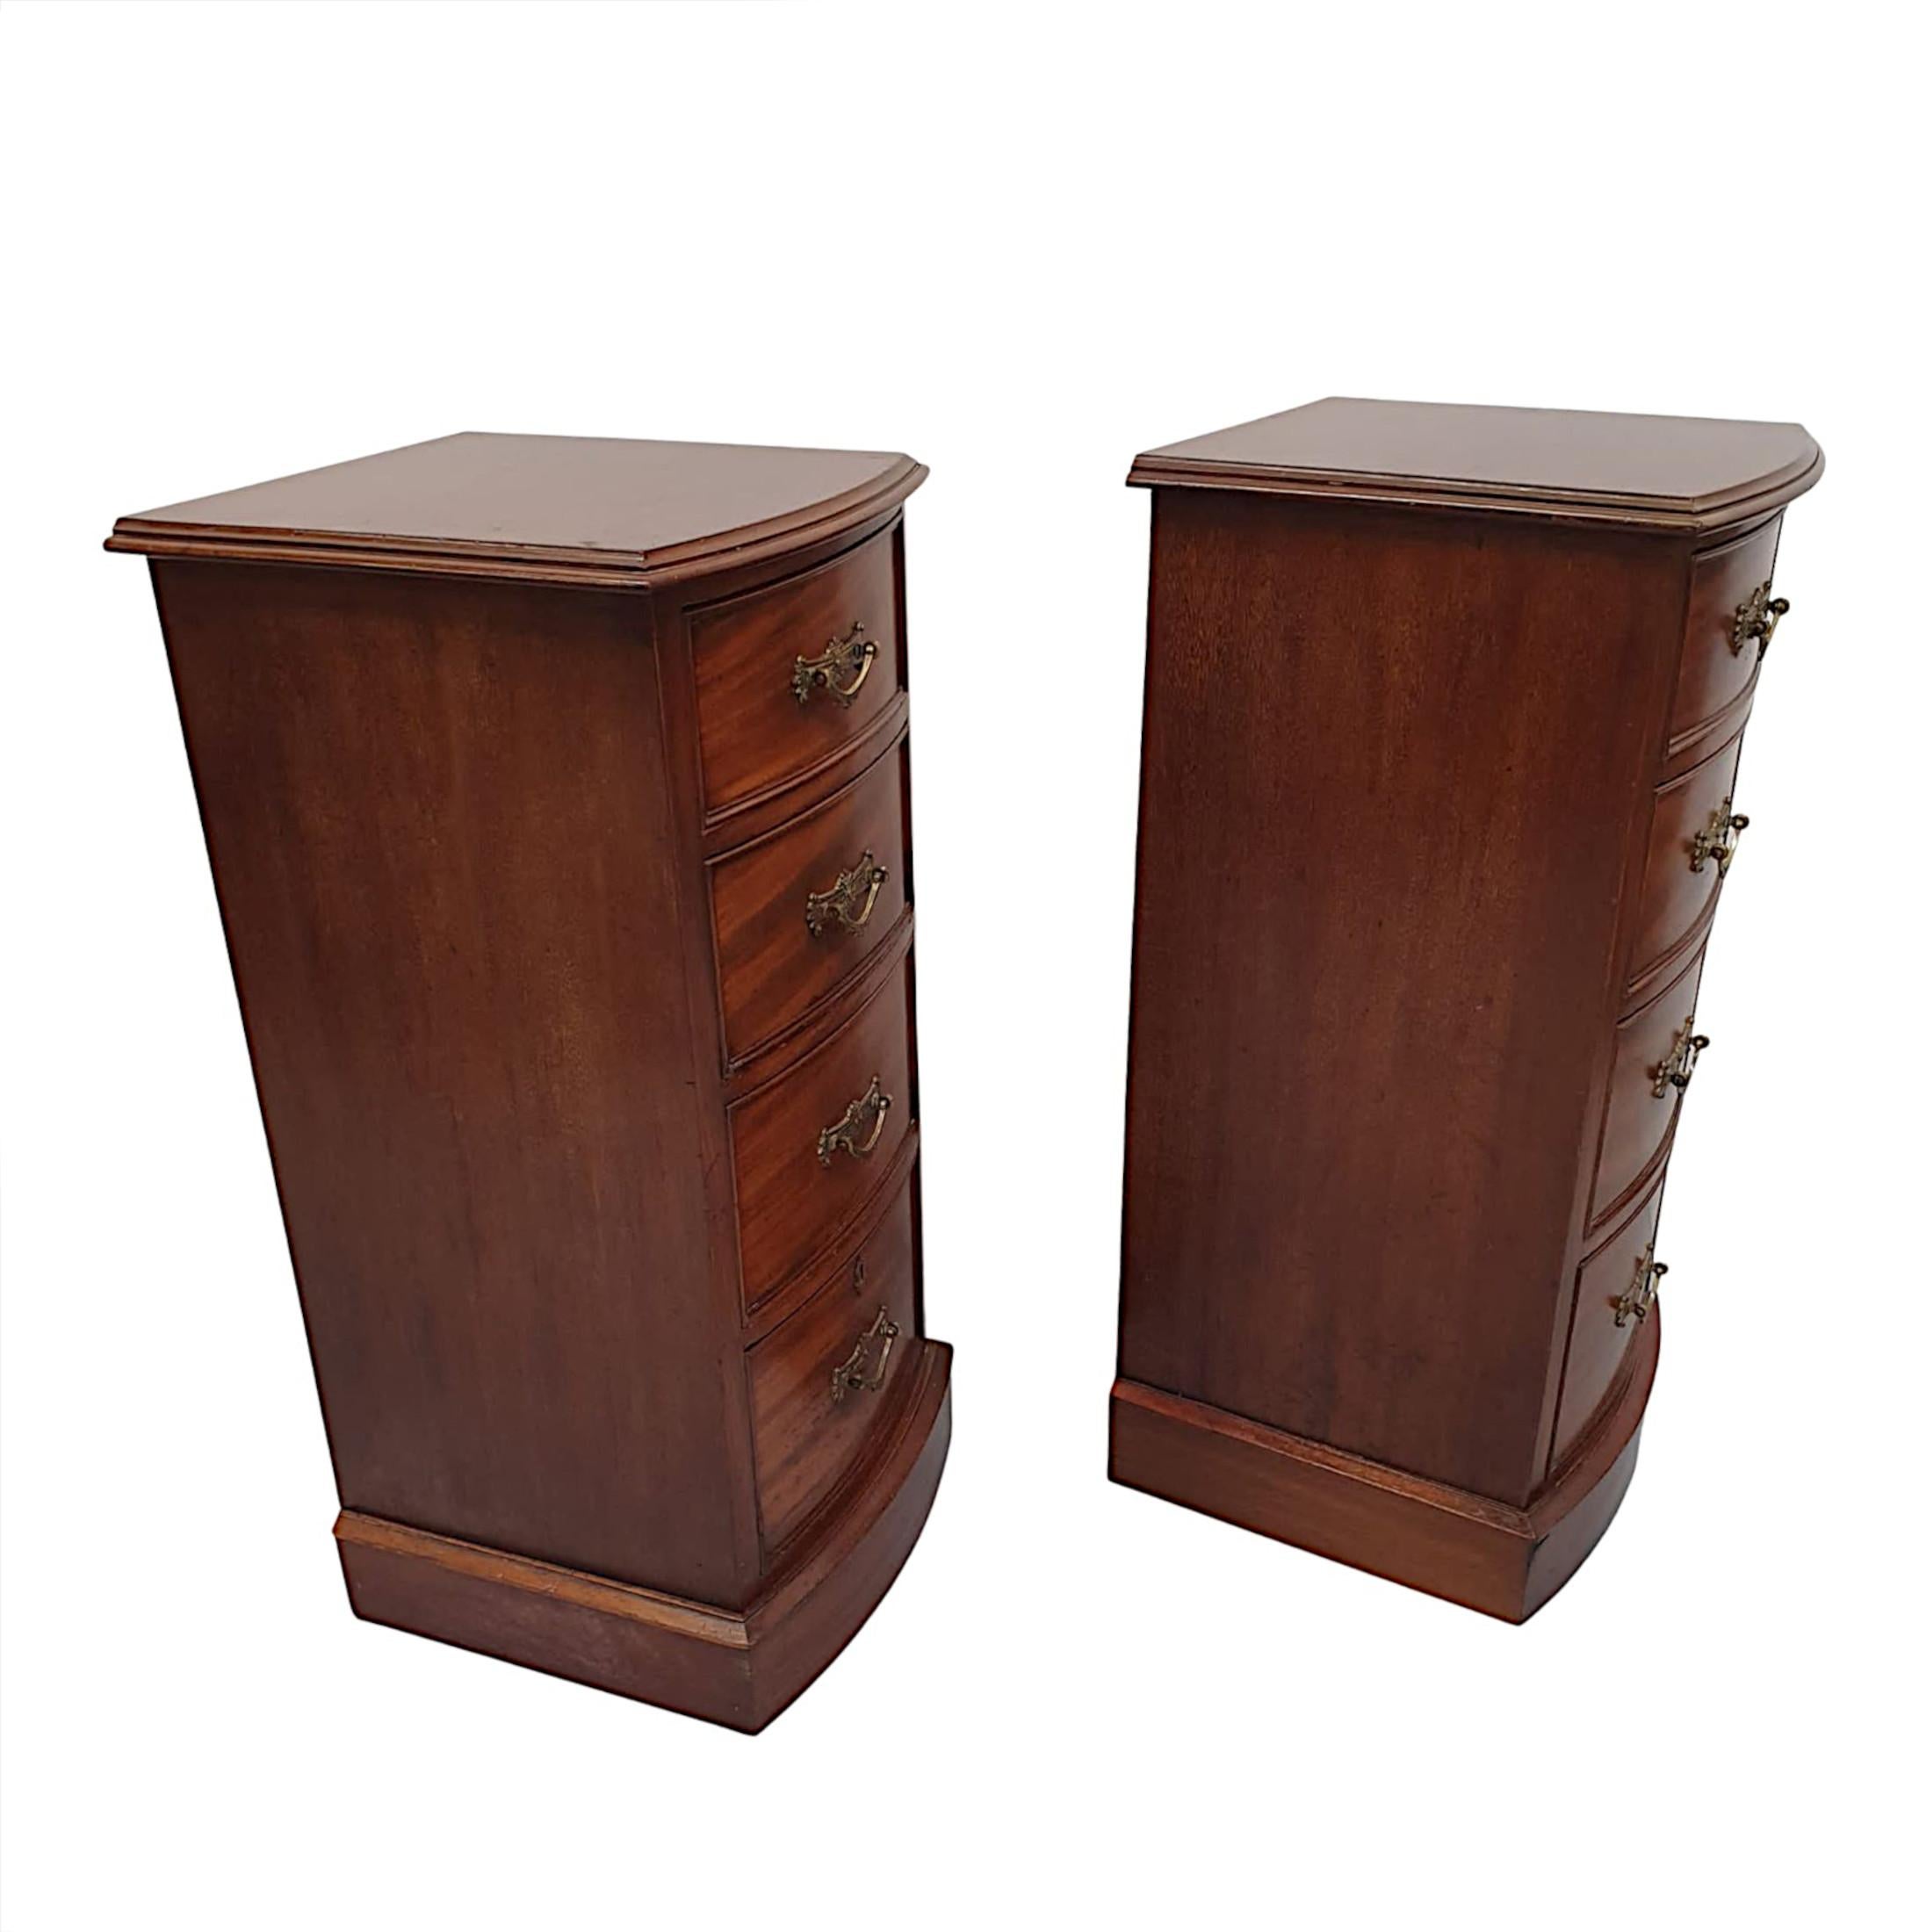 A very fine pair of 19th Century mahogany bow fronted bedside chests of grand proportions, exceptional quality and fabulously hand carved with gorgeously rich patination and grain. The well figured moulded top with stepped thumb moulded edge is